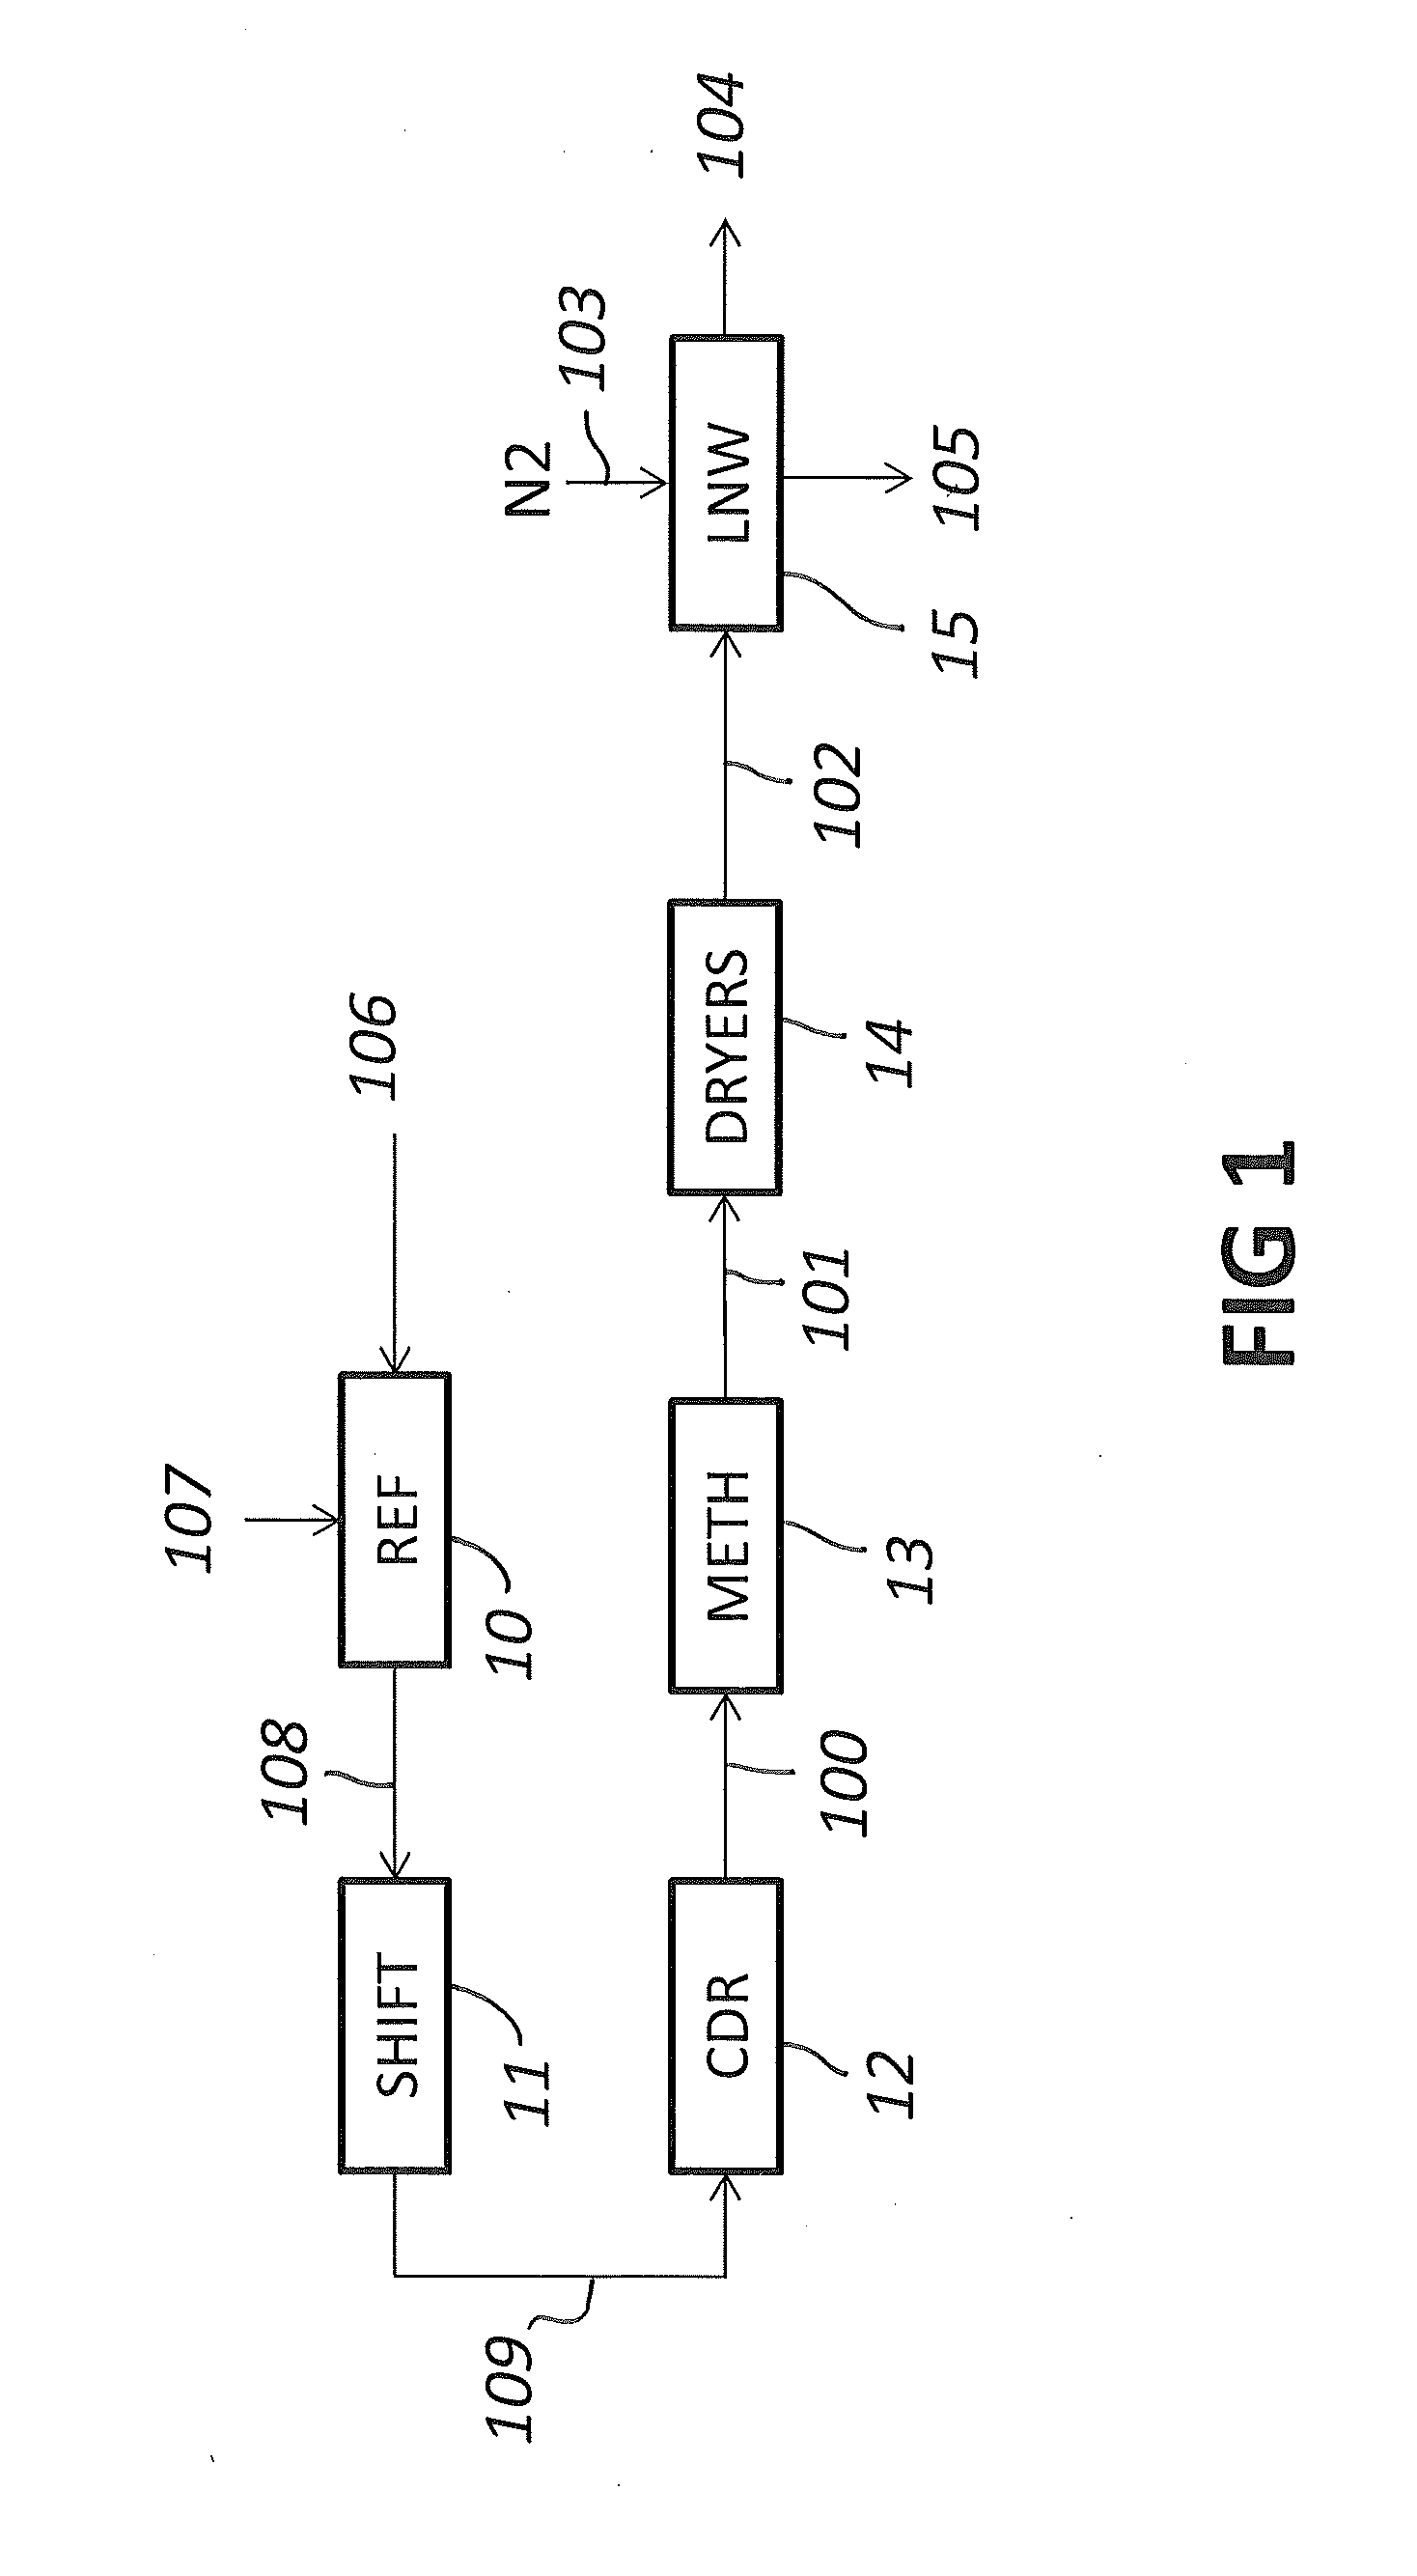 Process for purification of a synthesis gas containing hydrogen and impurities